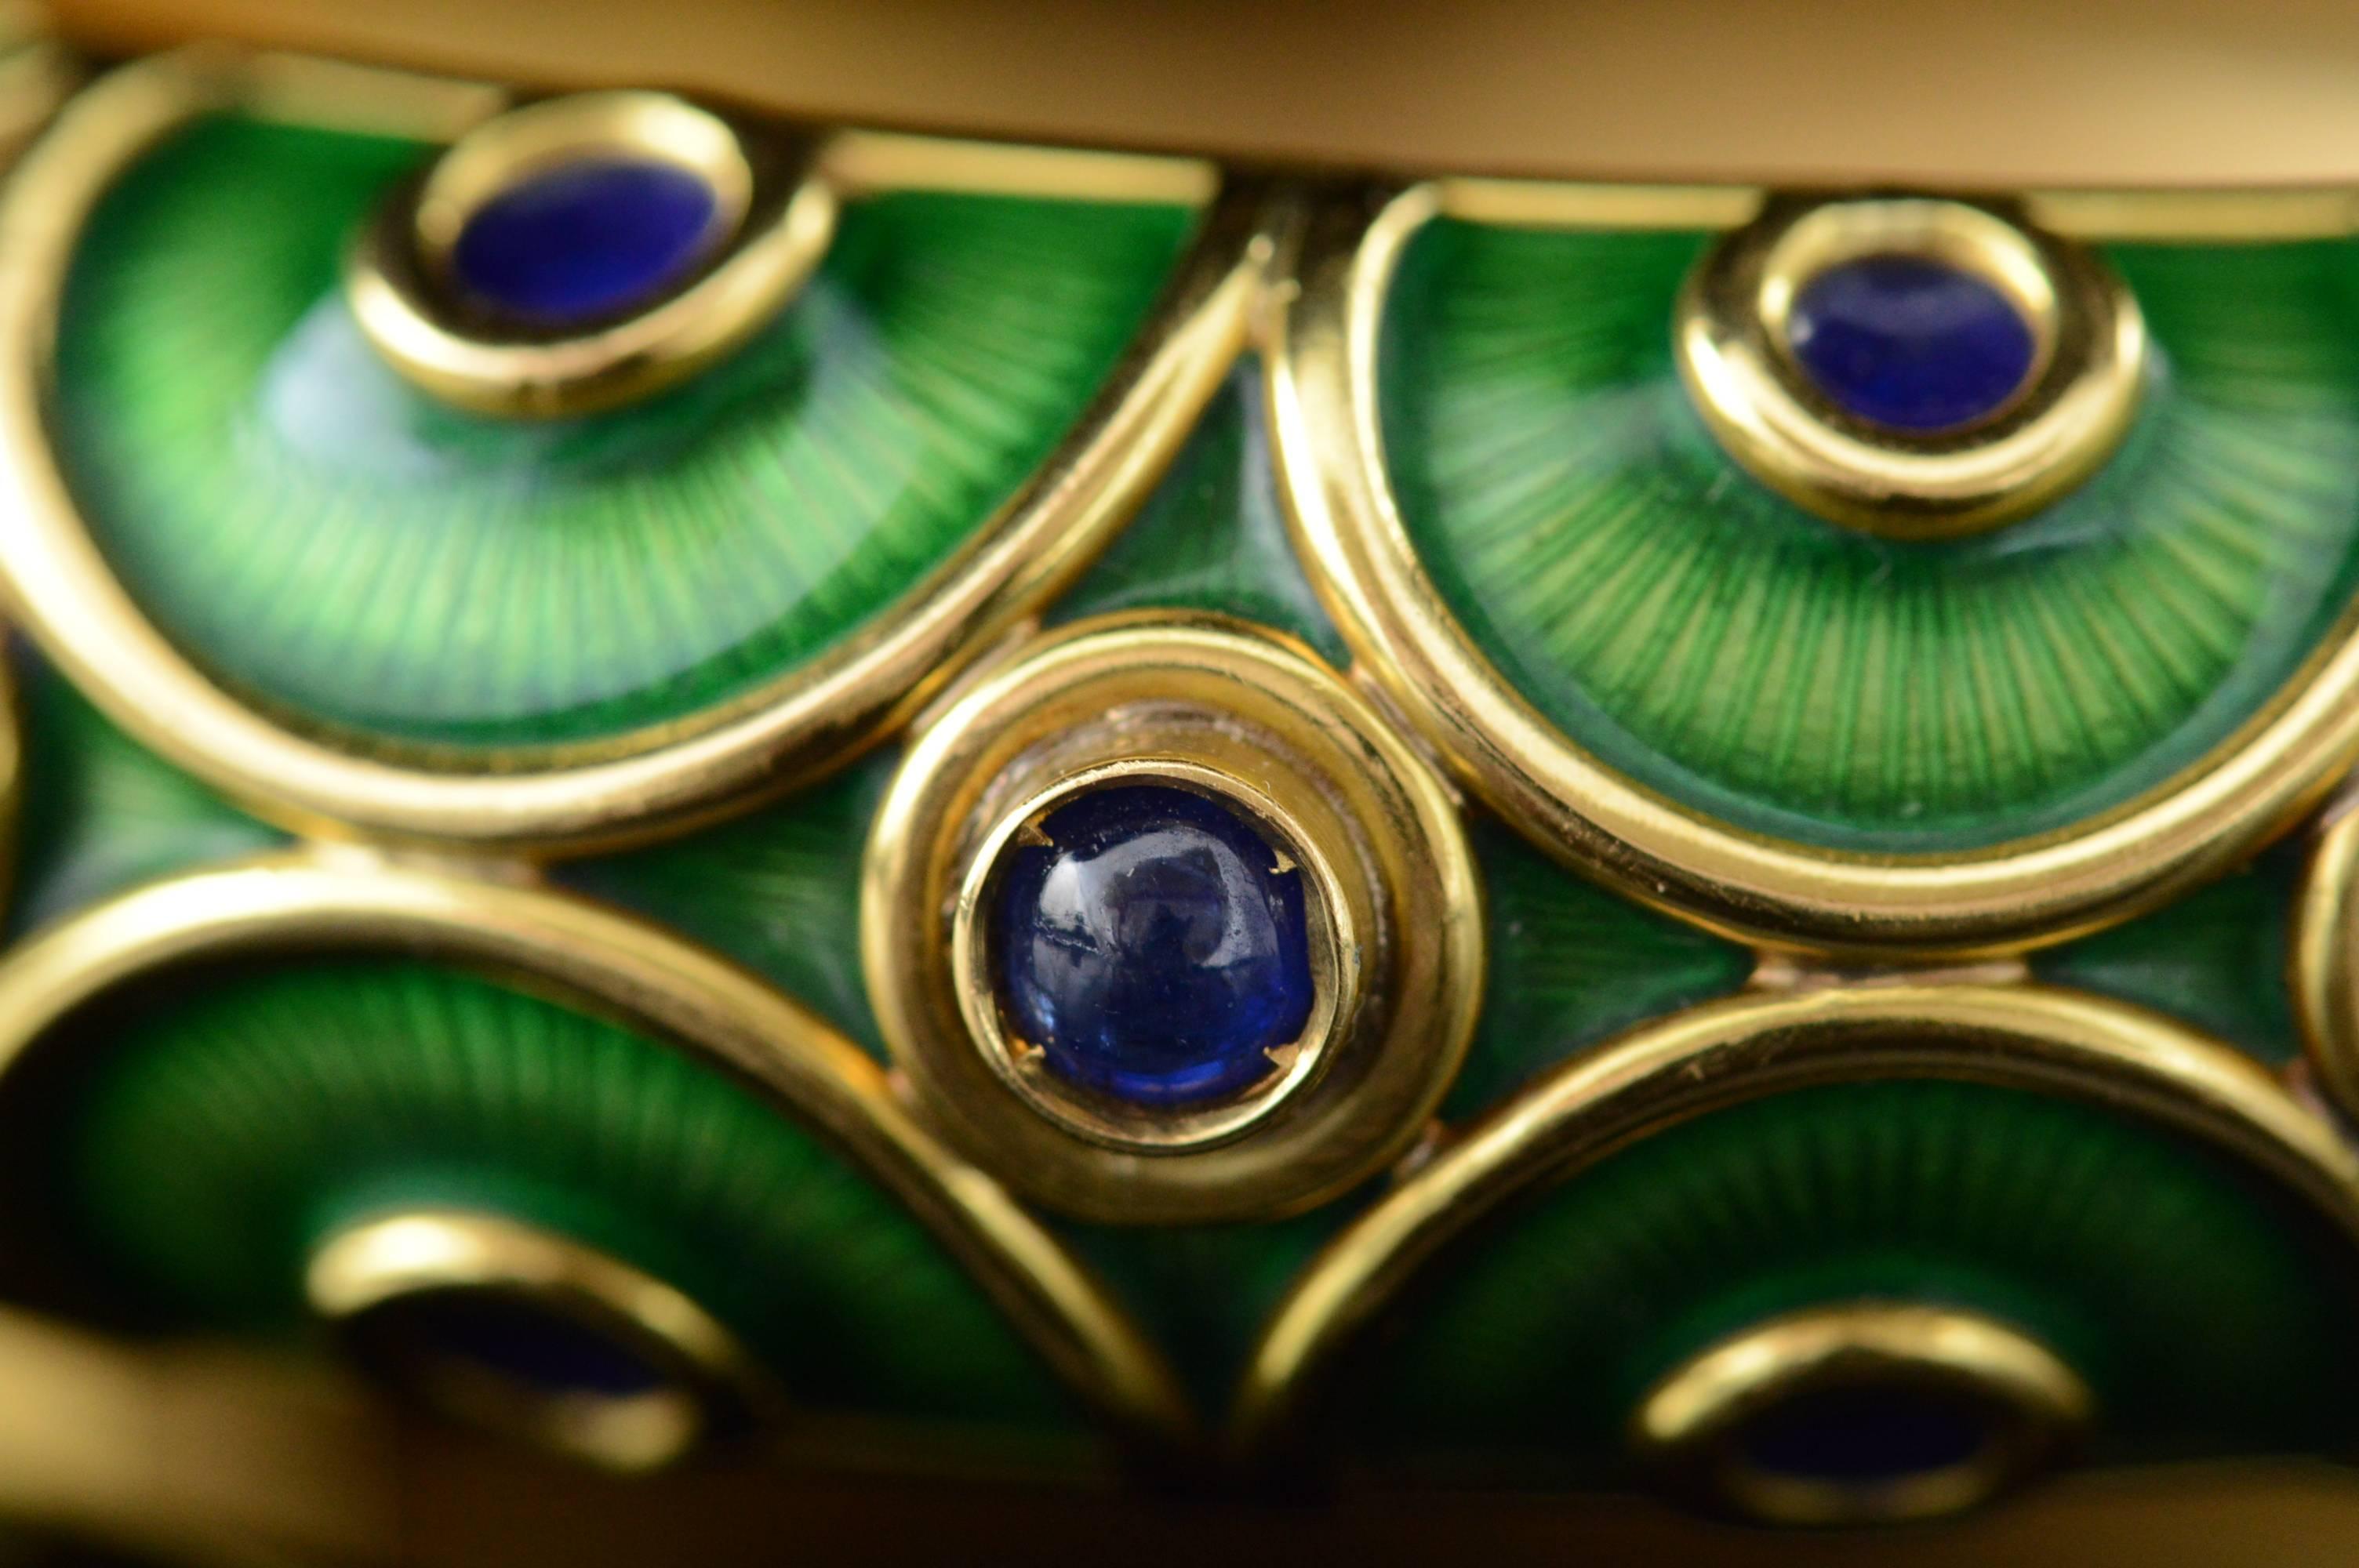 Green Enamel & Sapphire Gold Bangle Bracelet In Excellent Condition For Sale In Frederick, MD